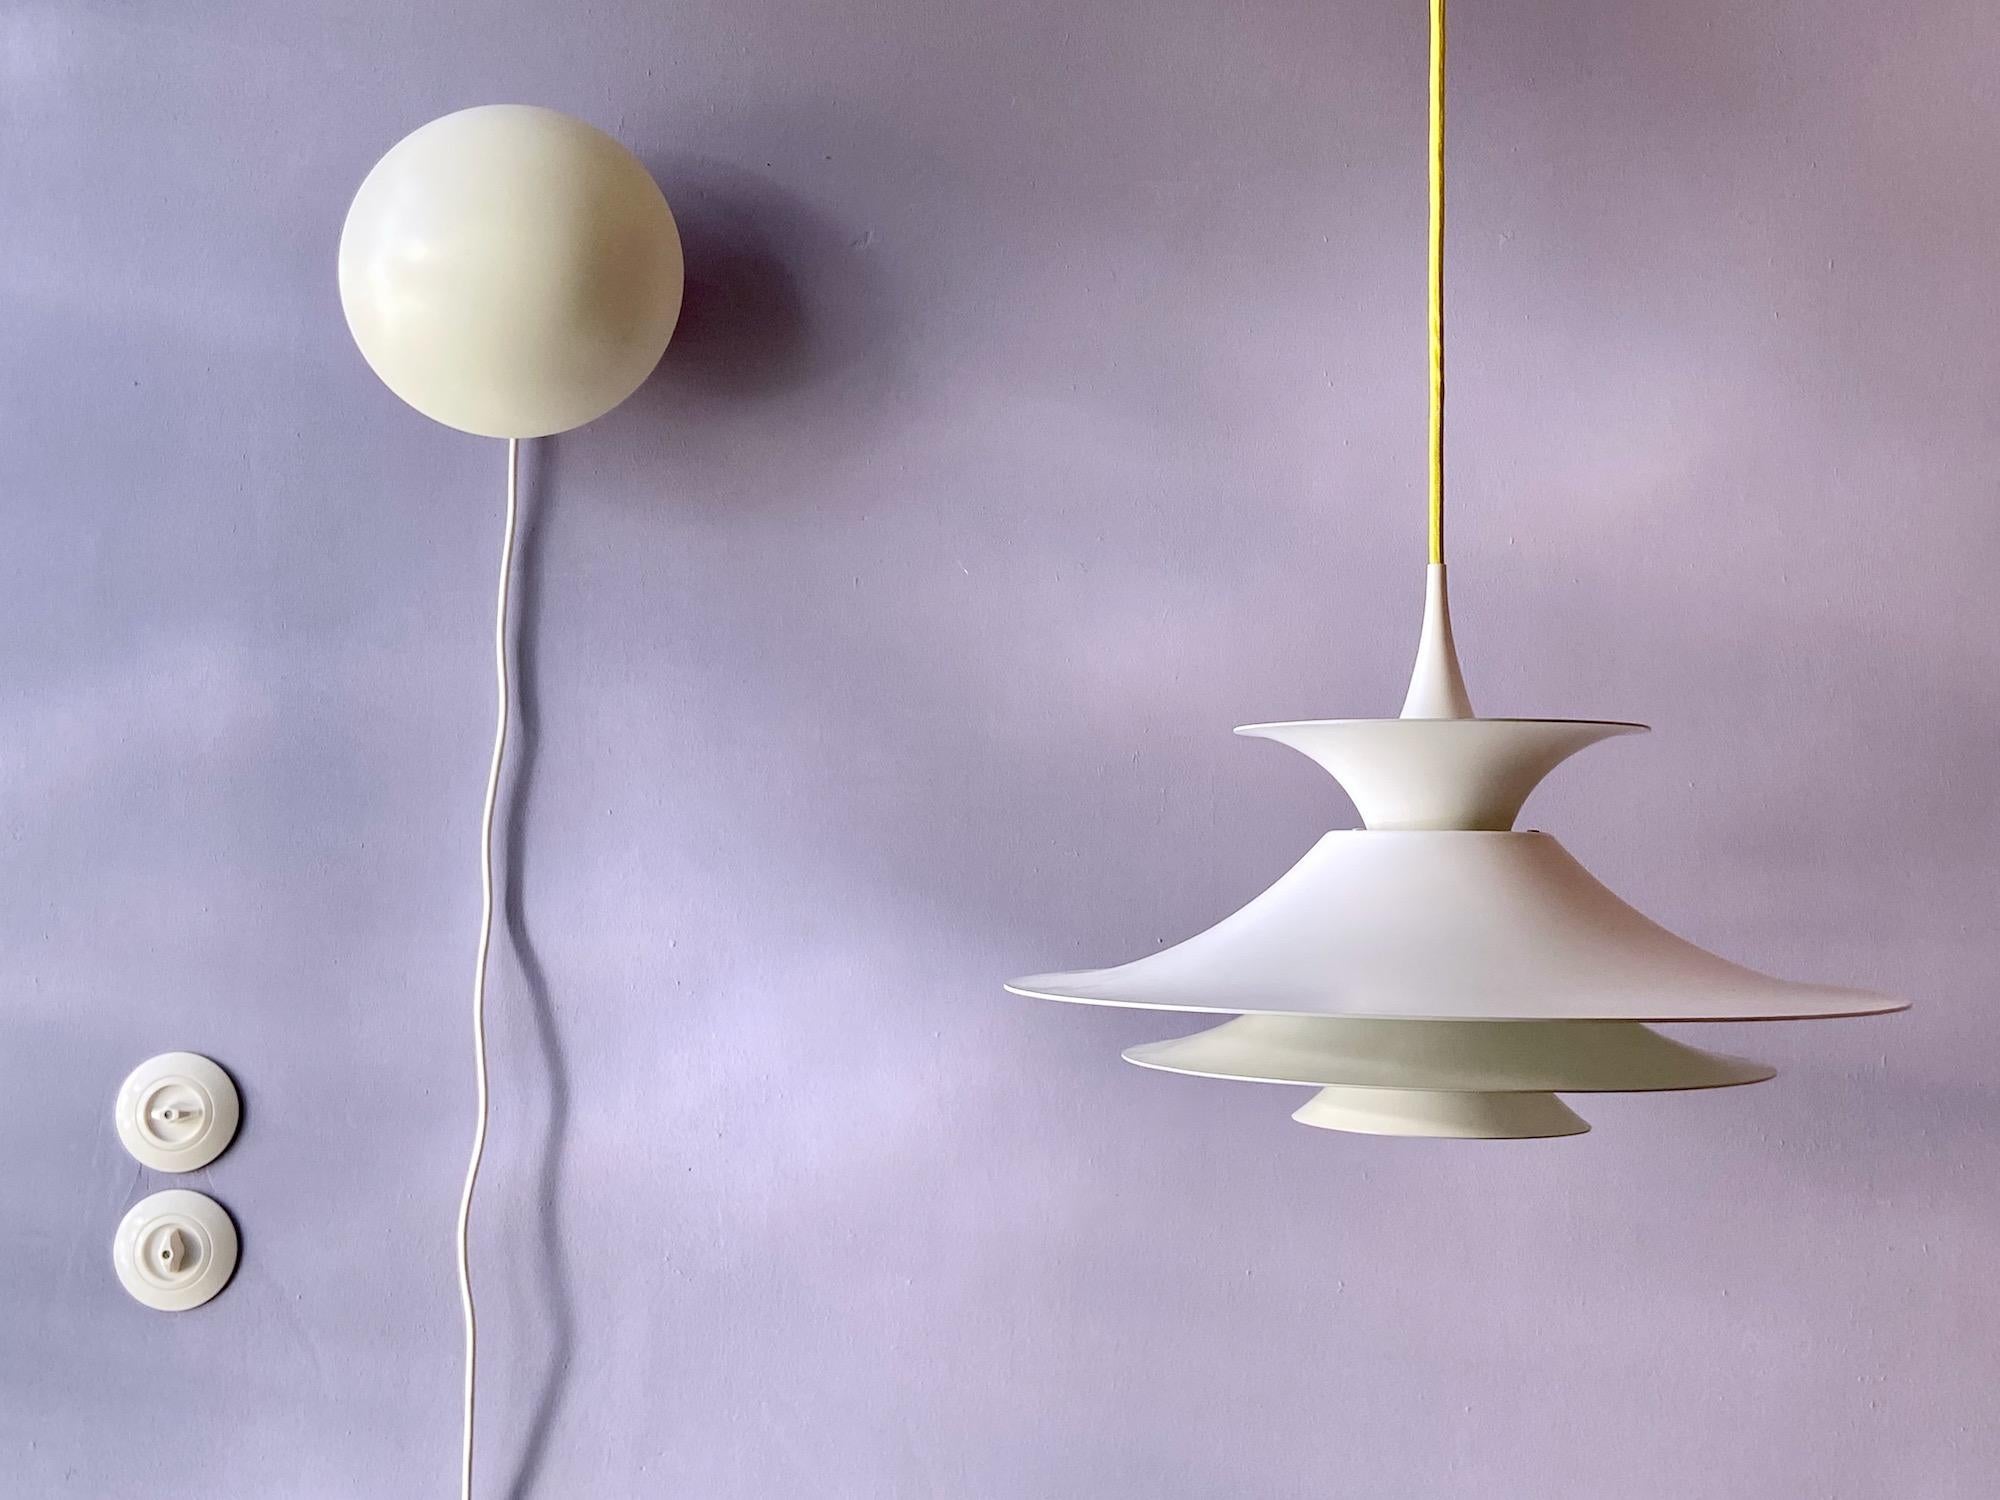 Radius 1 pendant by Erik Balslev. White lacquered aluminium. Produced by Fog & Mørup. Measures: 47 cm diameter version with E26/27 Edison socket. No parts missing! With new yellow fabric cord. Ready to use.